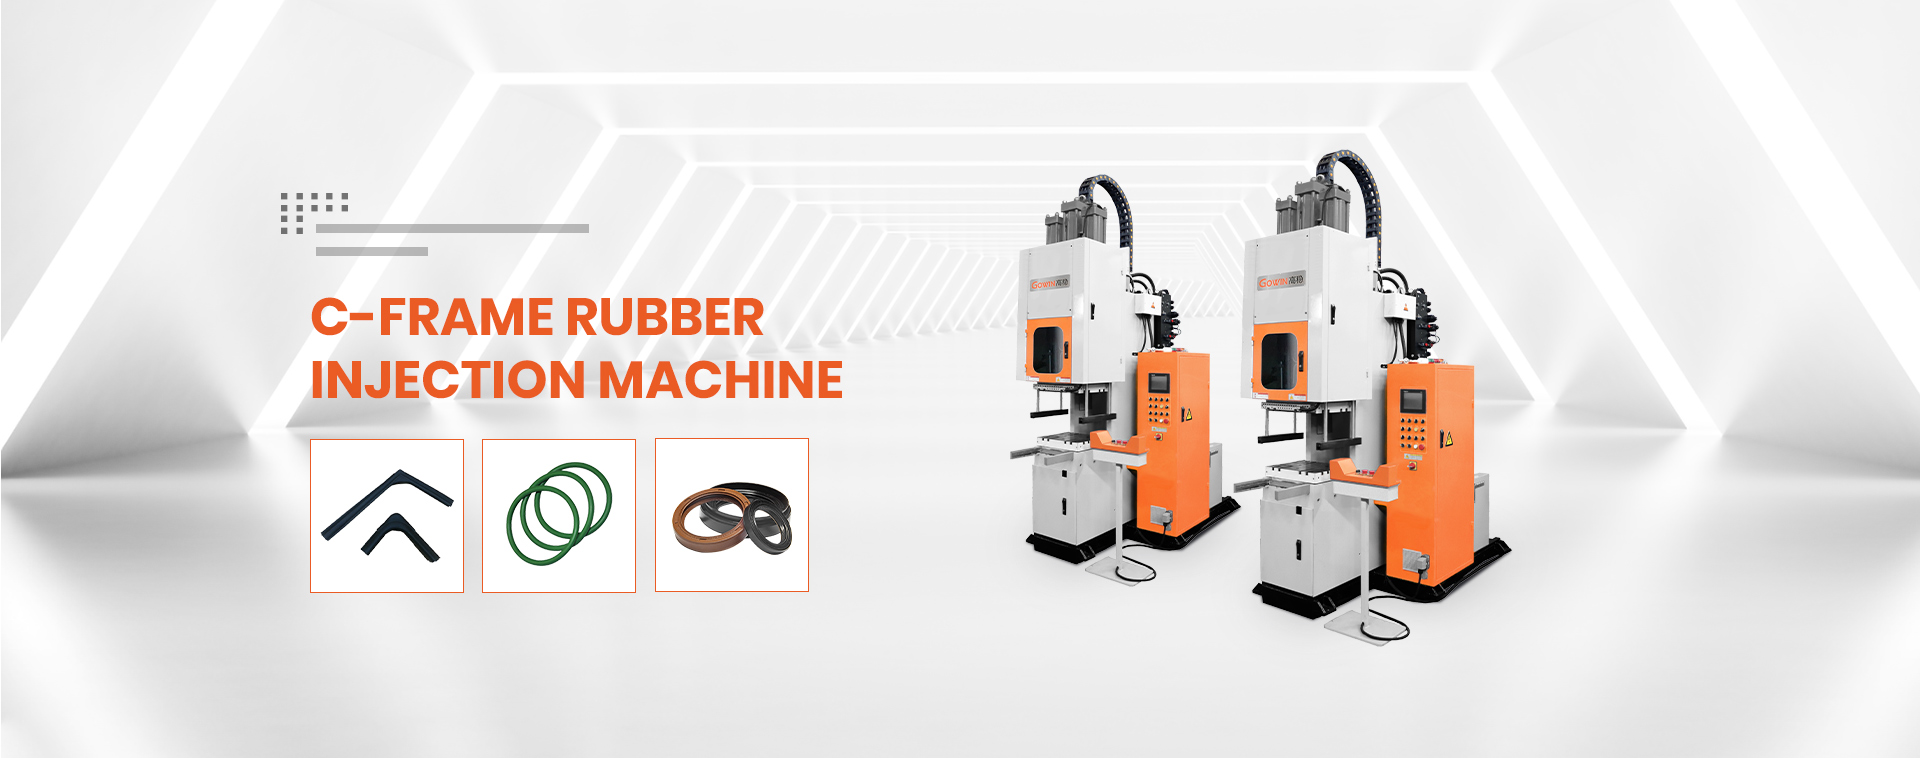 Car-Sealing Joint C-Frame Rubber Injection Machine